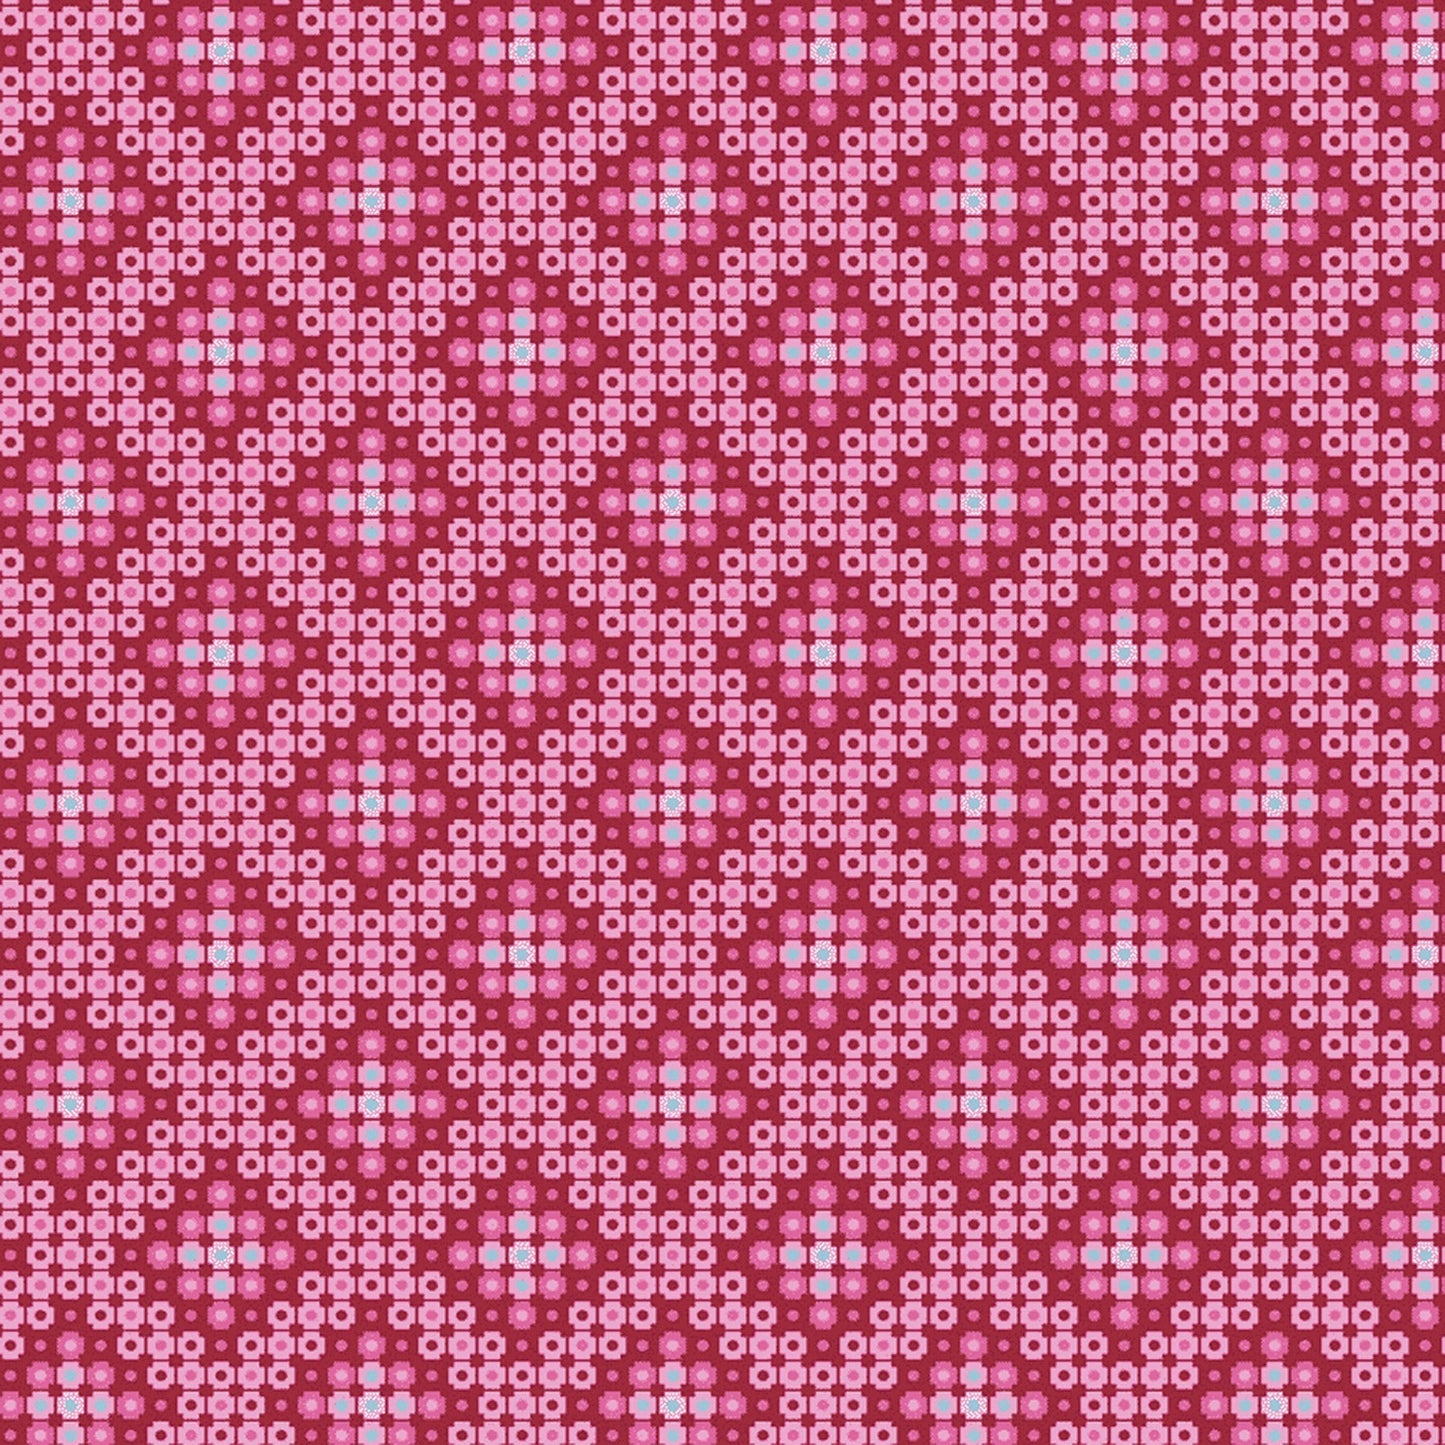  Crossweave in fuschia (13266-24)  is from Stitchy by Christa Watson for Benartex. The crossweave print features pixelated shapes in shades of pink ranging from pale pink to red, with a hint of blue. The geometric pattern creates a striking contrast to the modern blenders presented in the rest of the line, and provides a balanced texture and interest to your project.